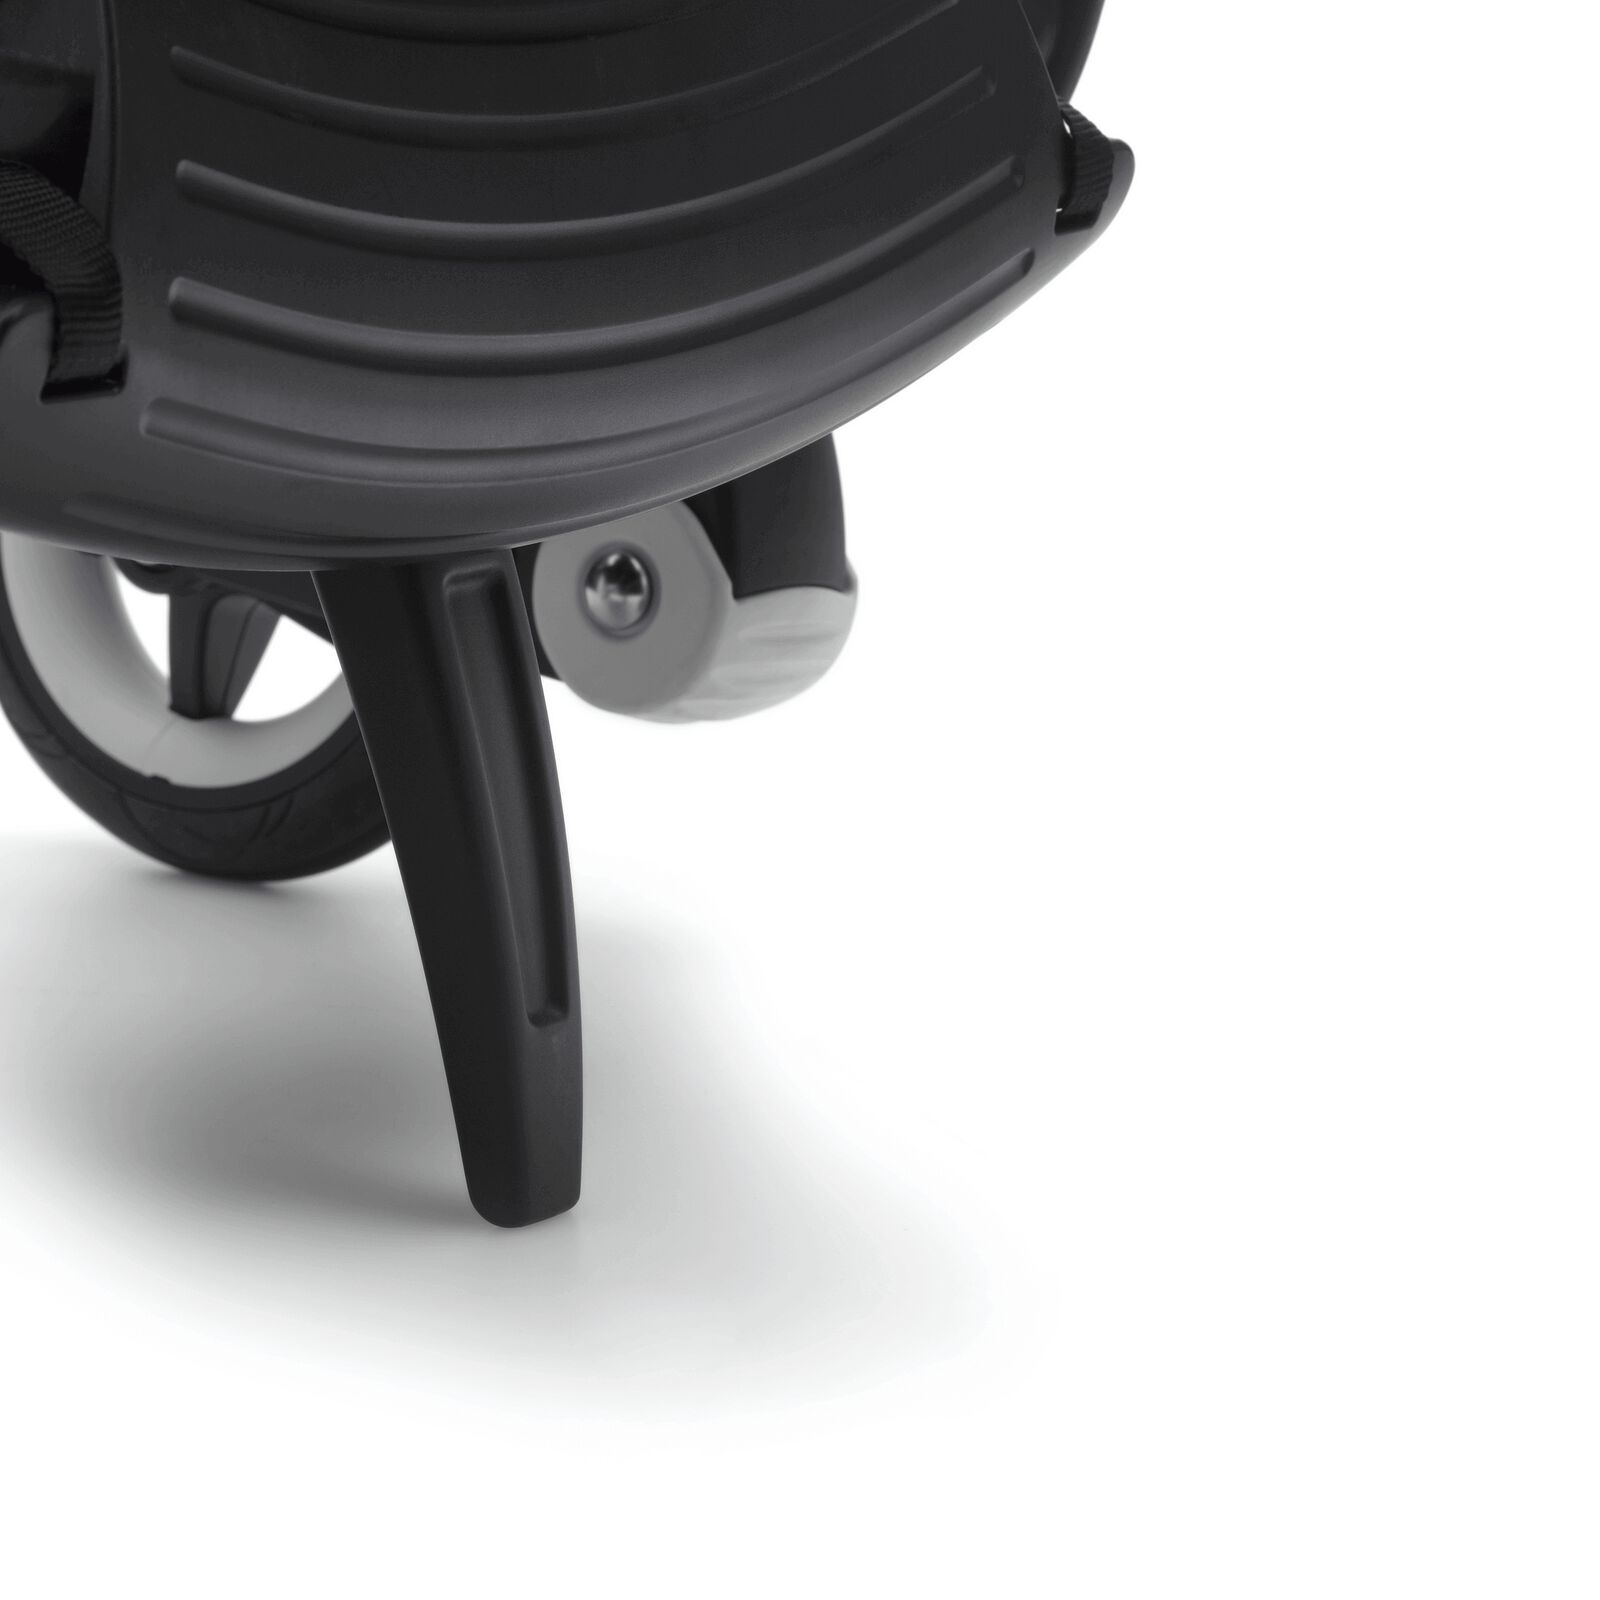 Bugaboo Bee self stand extension - View 1